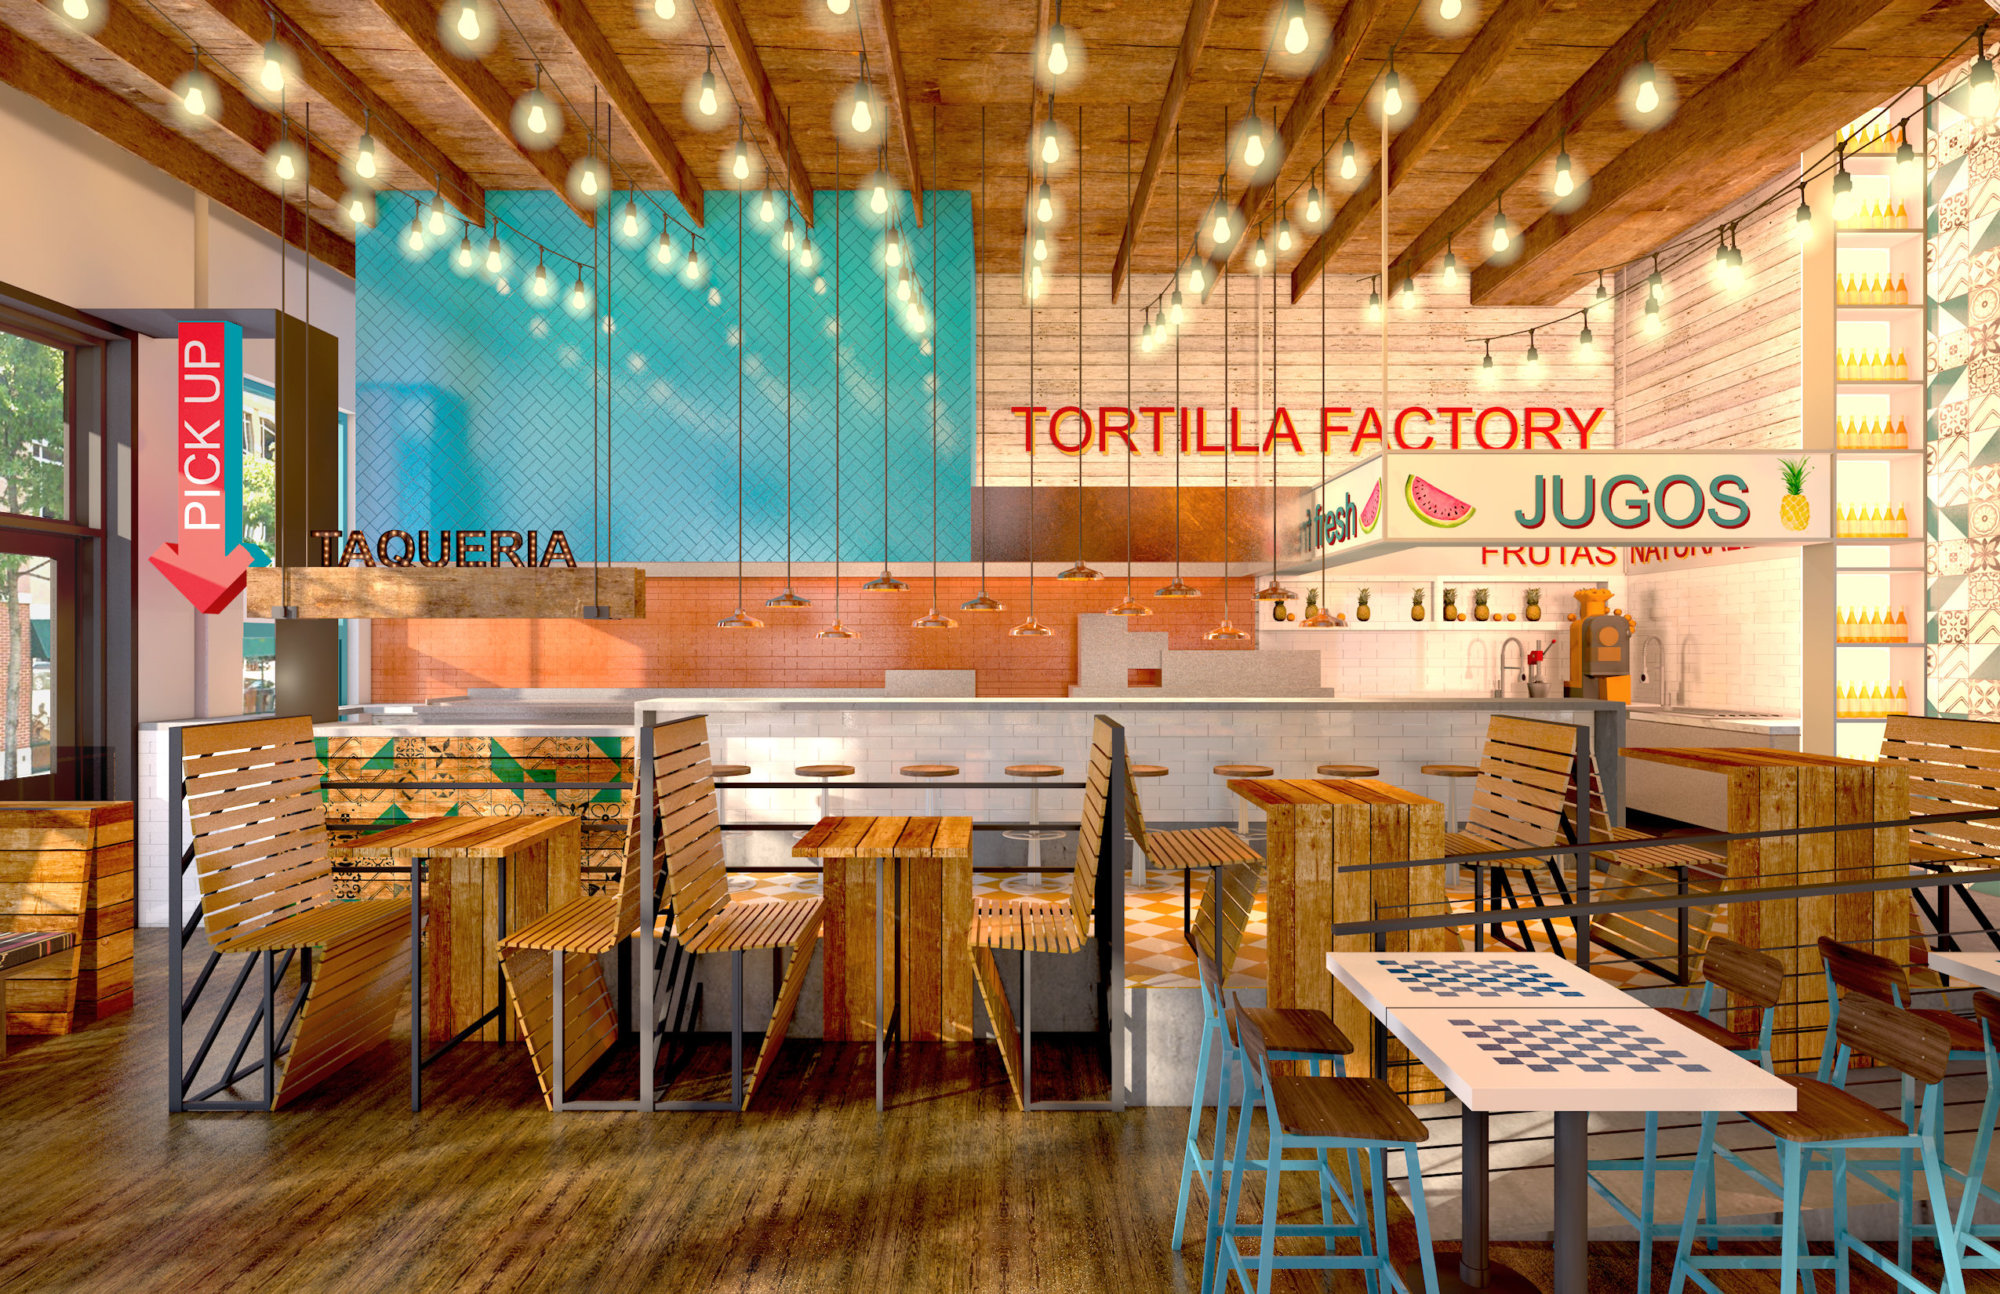 Famed Mexico City chef partners with two new restaurants in Clarendon